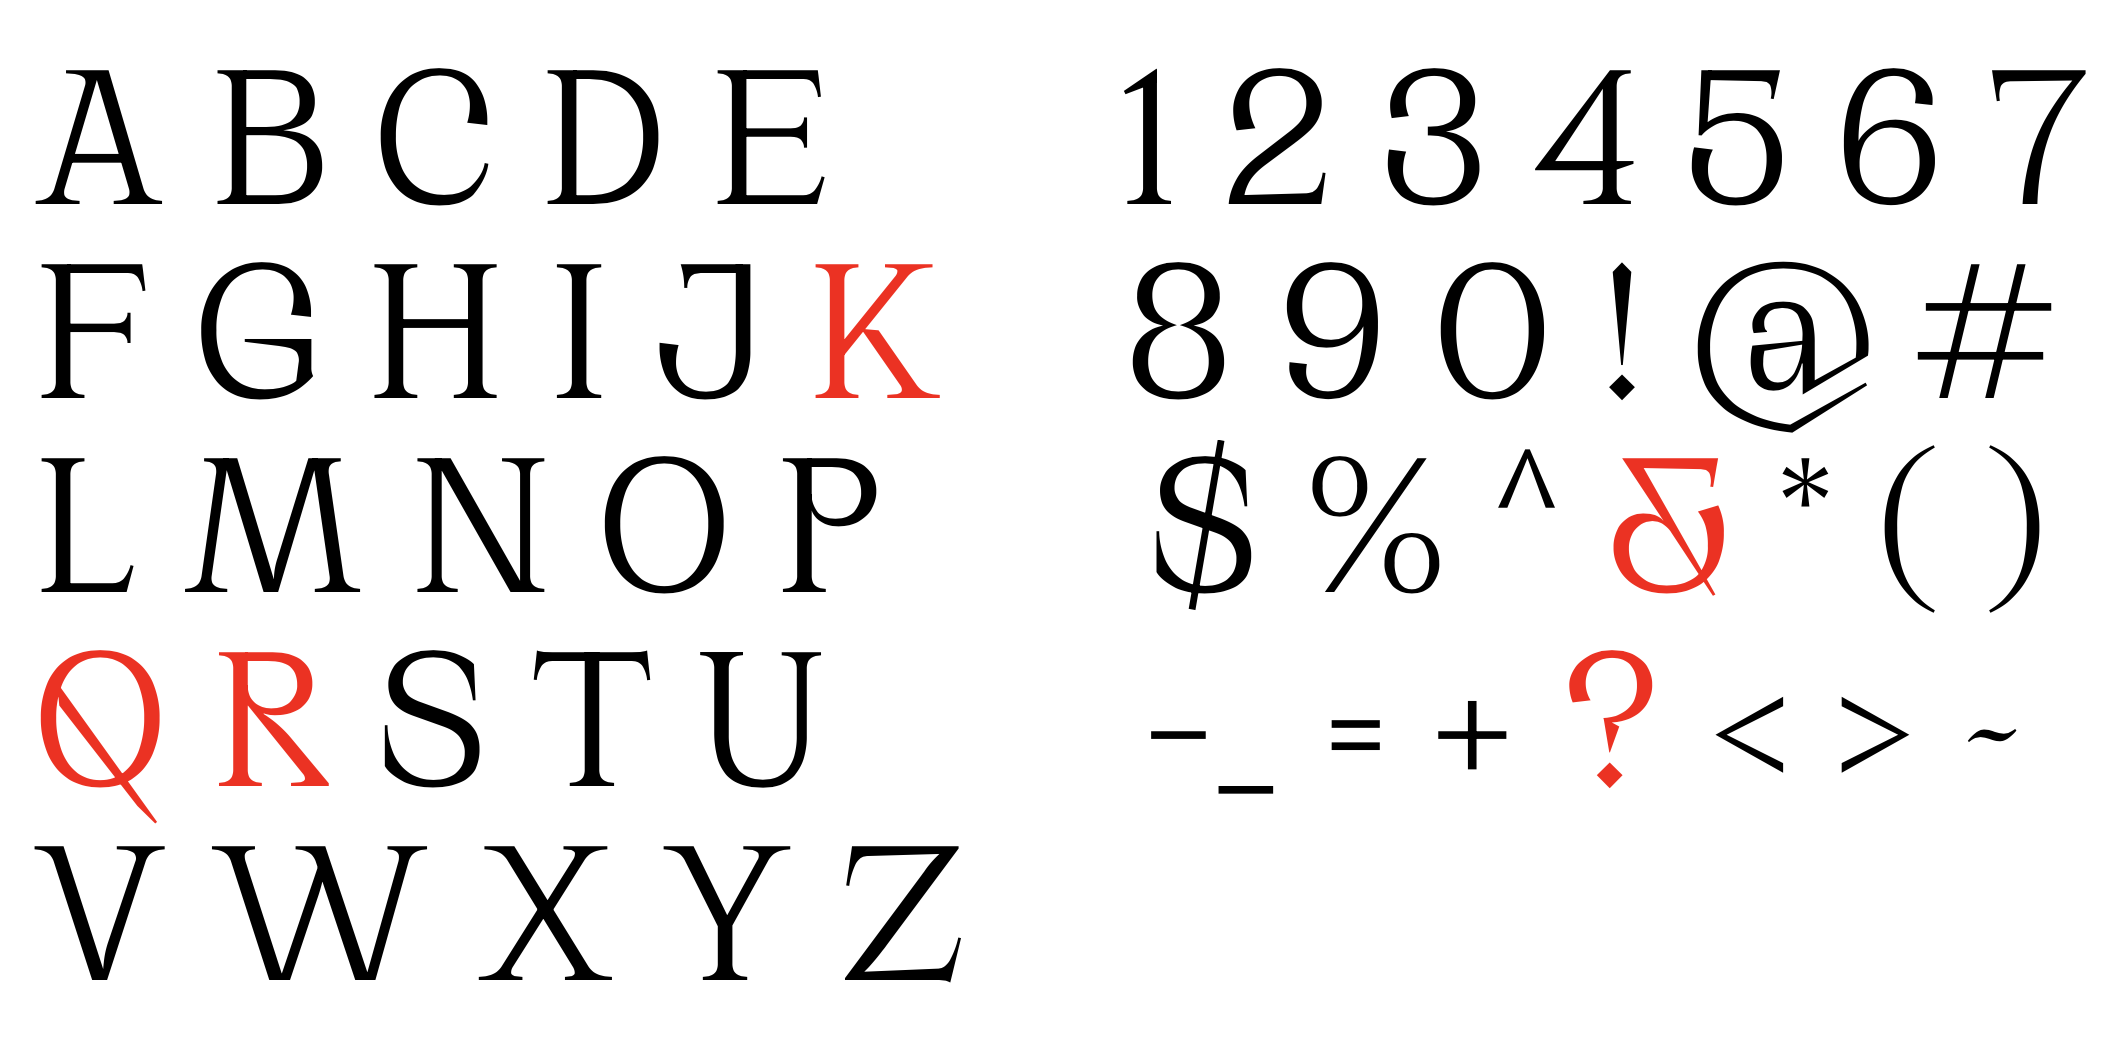 the alphabet (along with some symbols and numbers) in the Cirka typeface